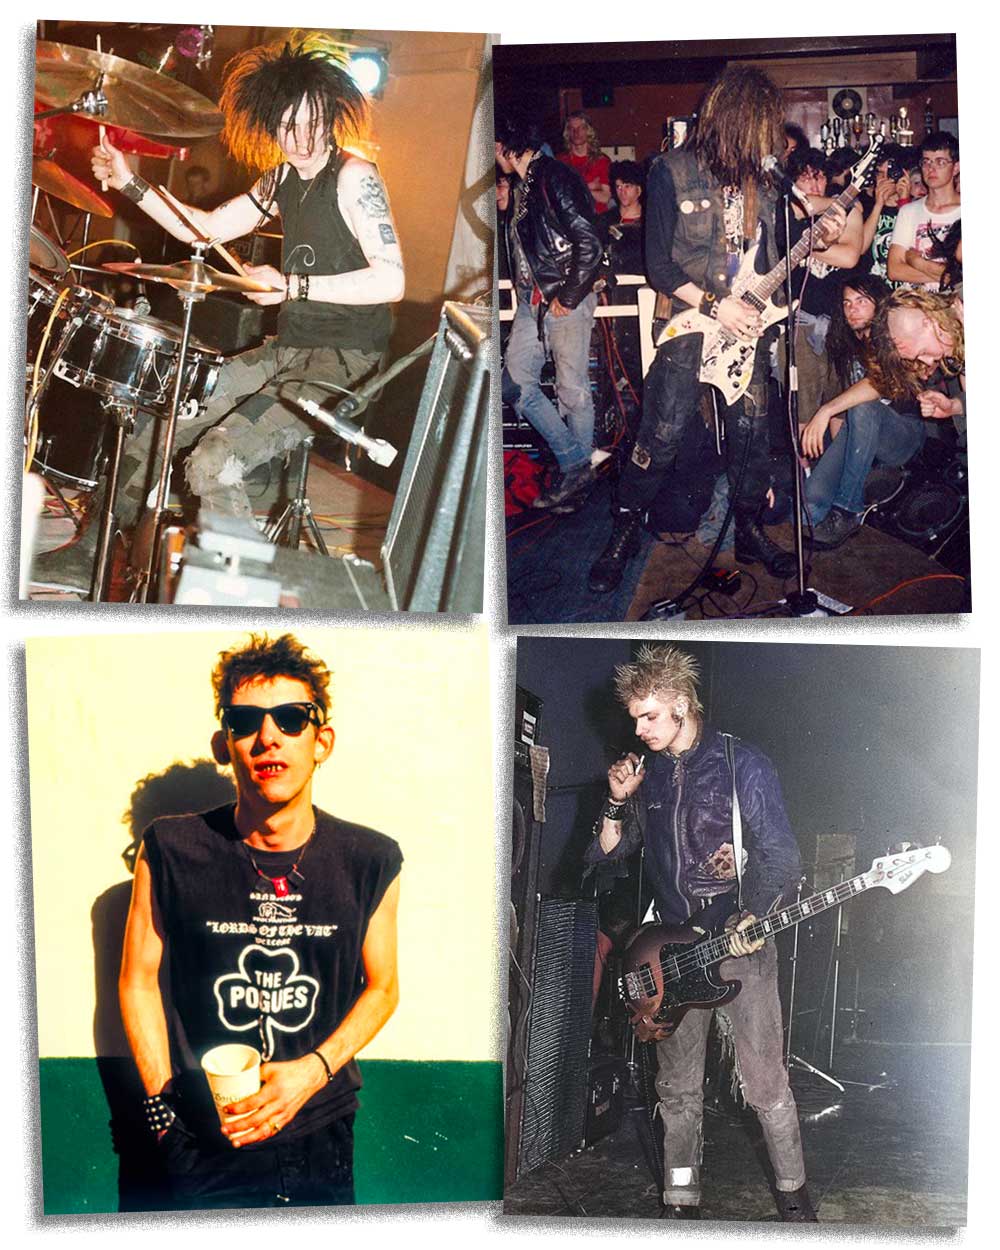 The Pogues, Antisect, Doom, and Discharge Crust Punk fashion